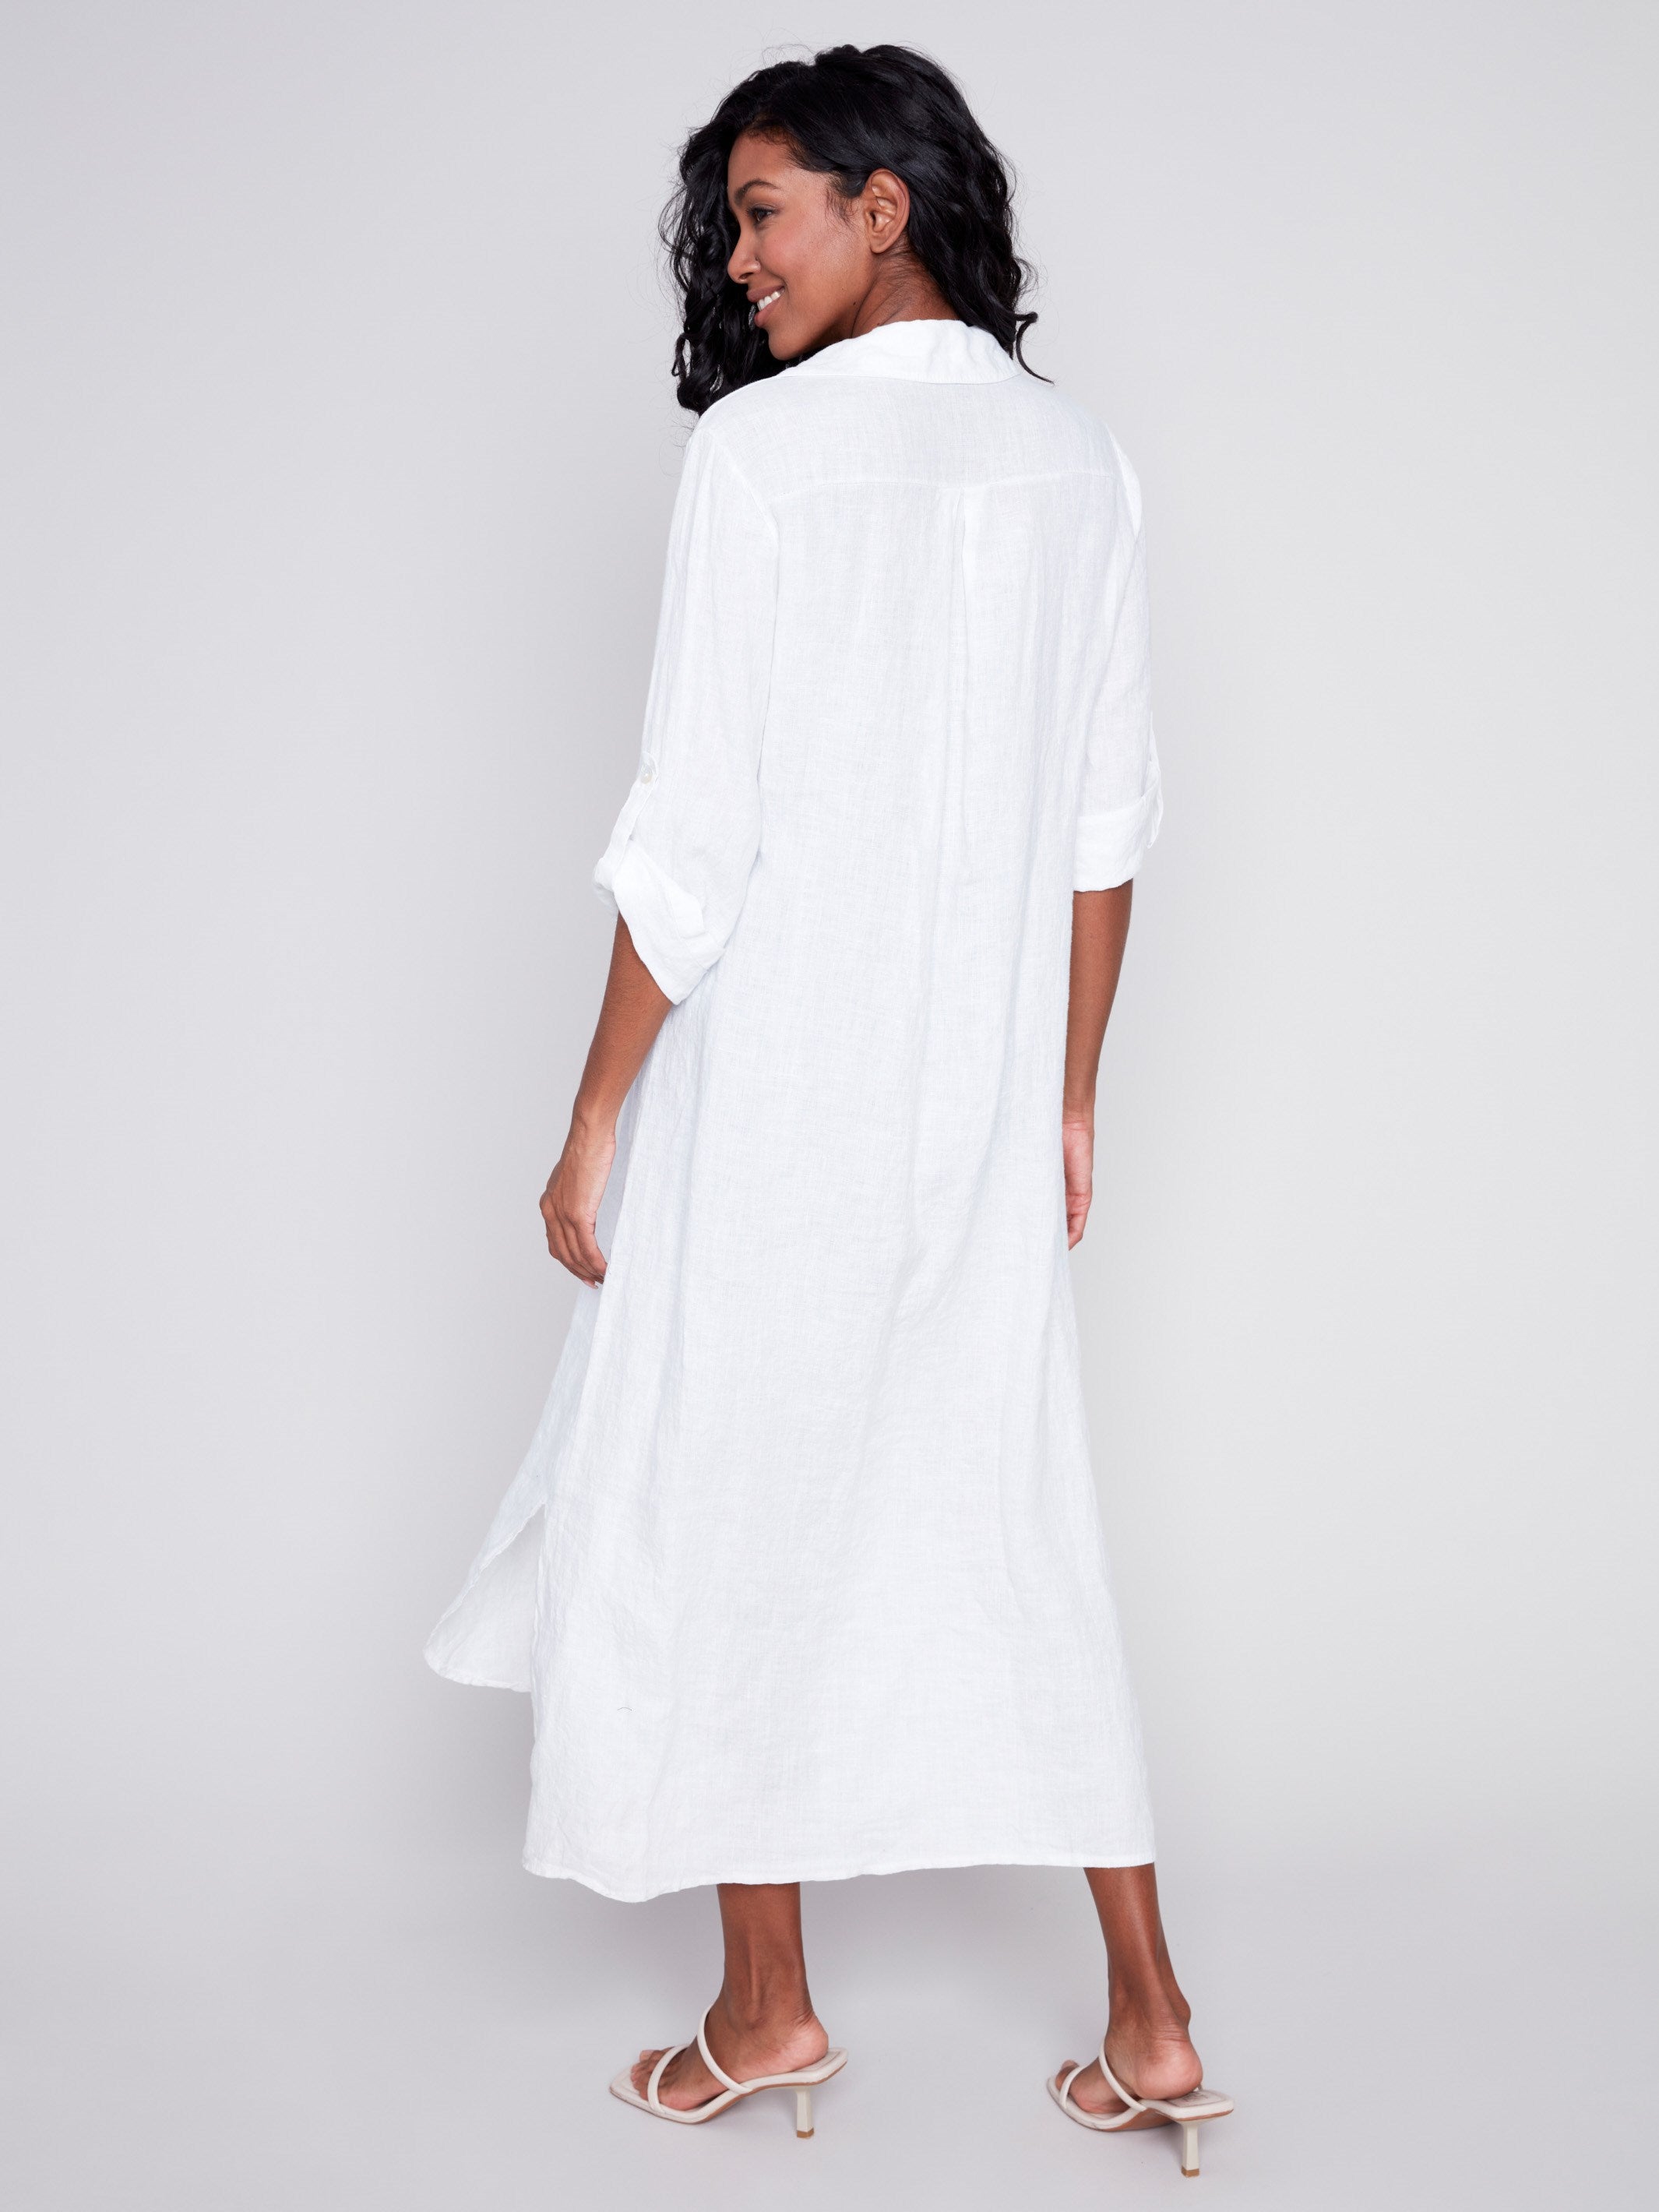 Long Linen Tunic Dress - White - Charlie B Collection Canada - Image 3